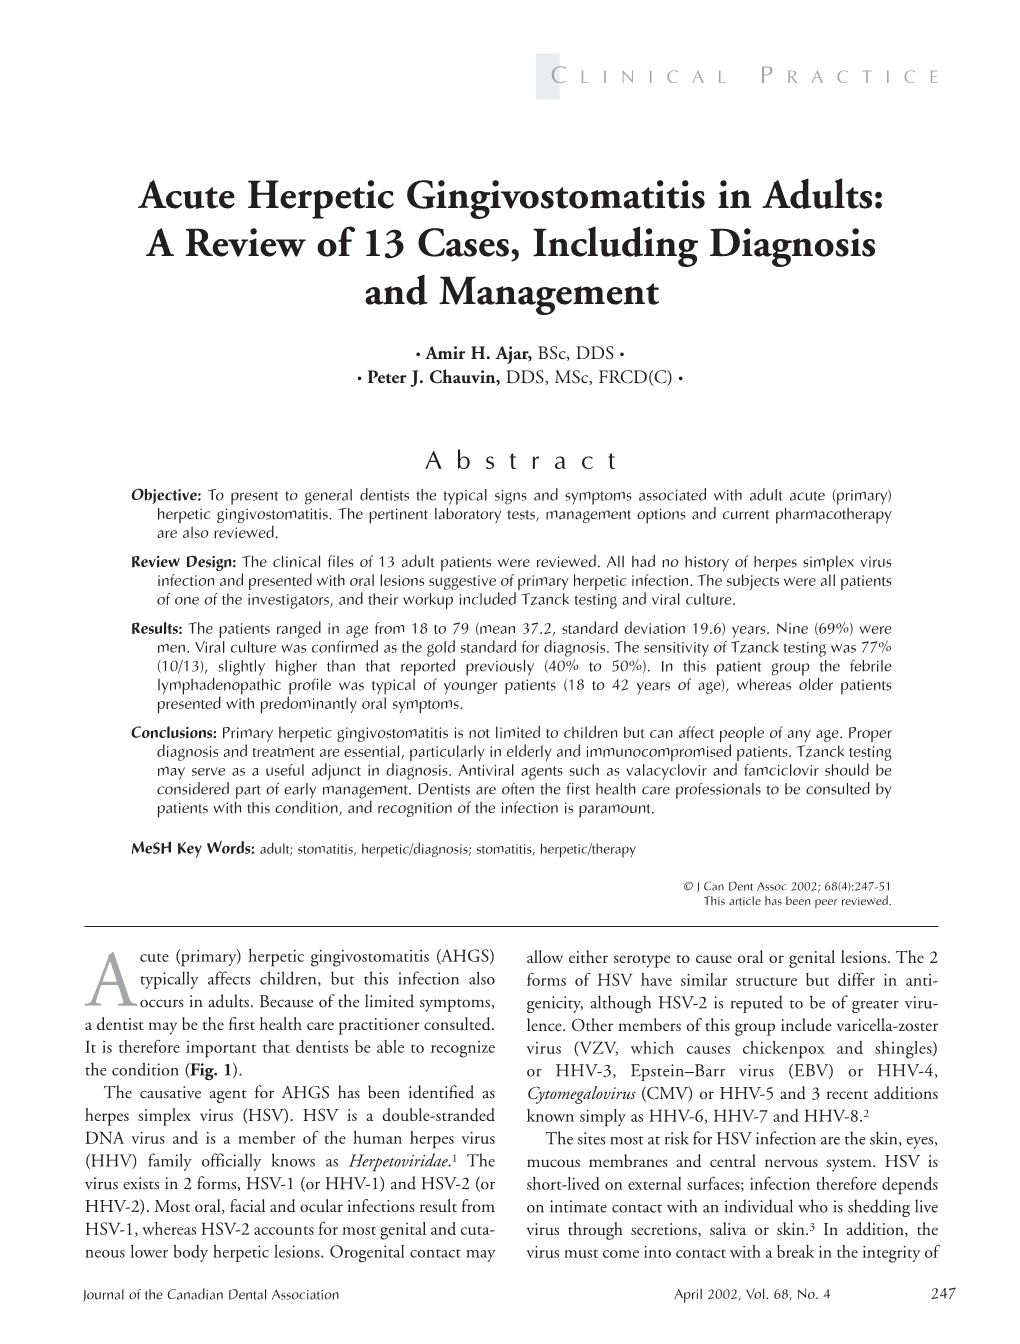 Acute Herpetic Gingivostomatitis in Adults: a Review of 13 Cases, Including Diagnosis and Management